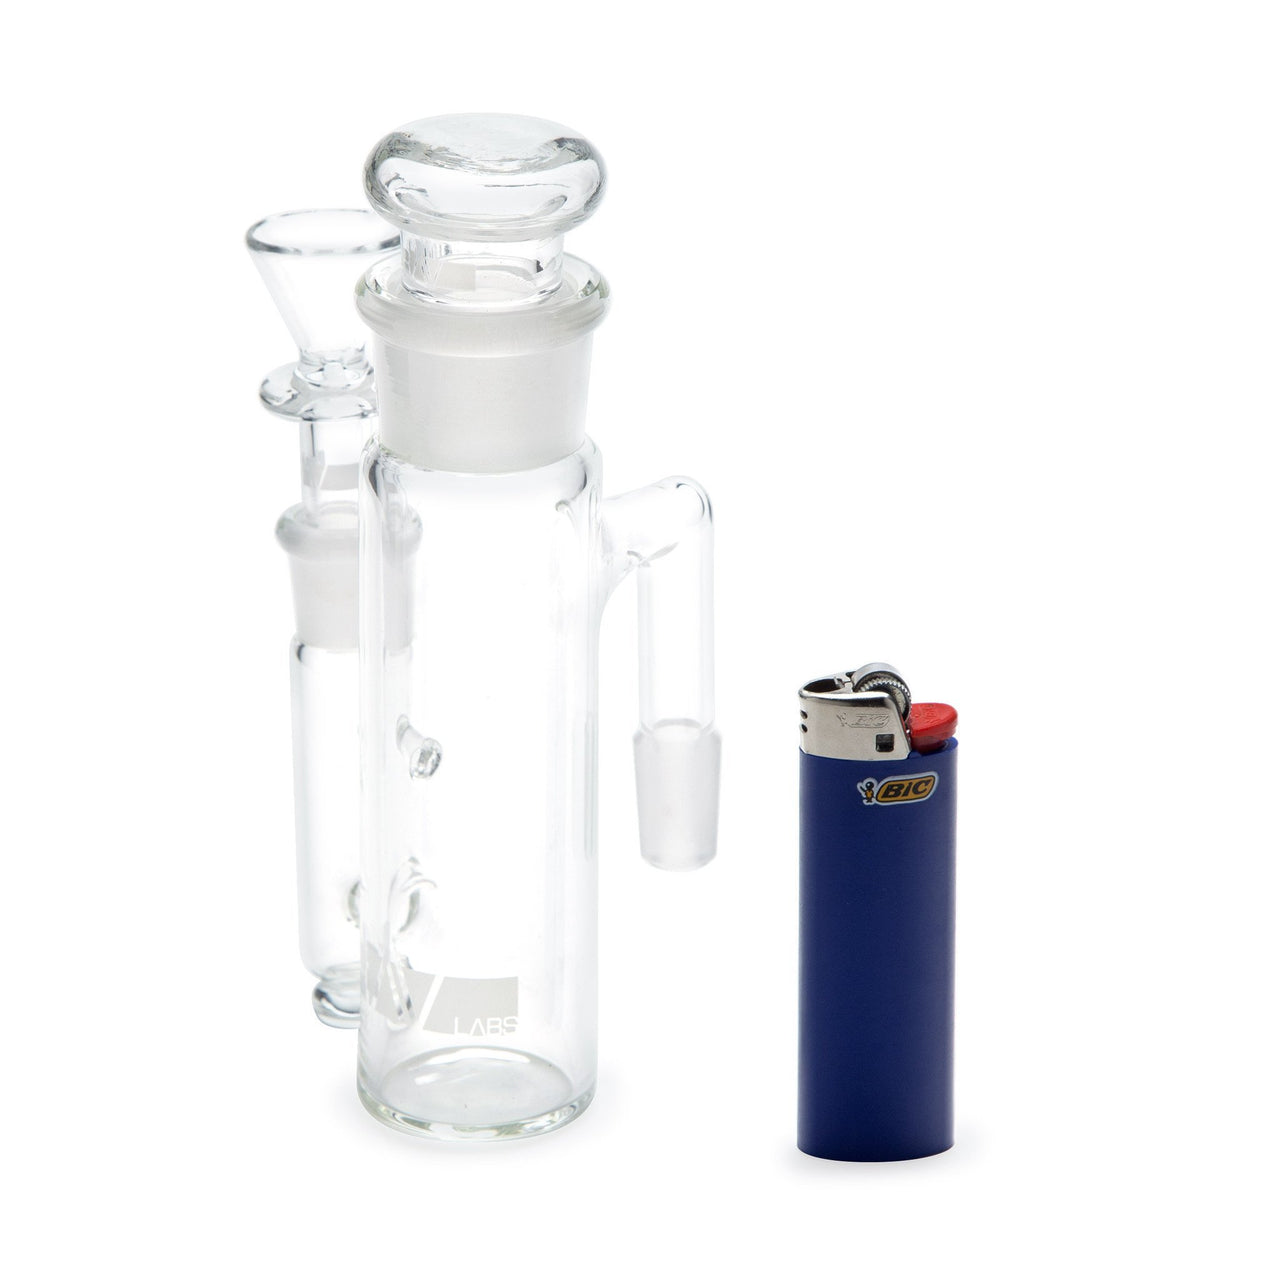 Bonz 4 Metal Pipe w/ Clear Ash Catcher Body by BIG Pipe – Mary Jane's  Headquarters